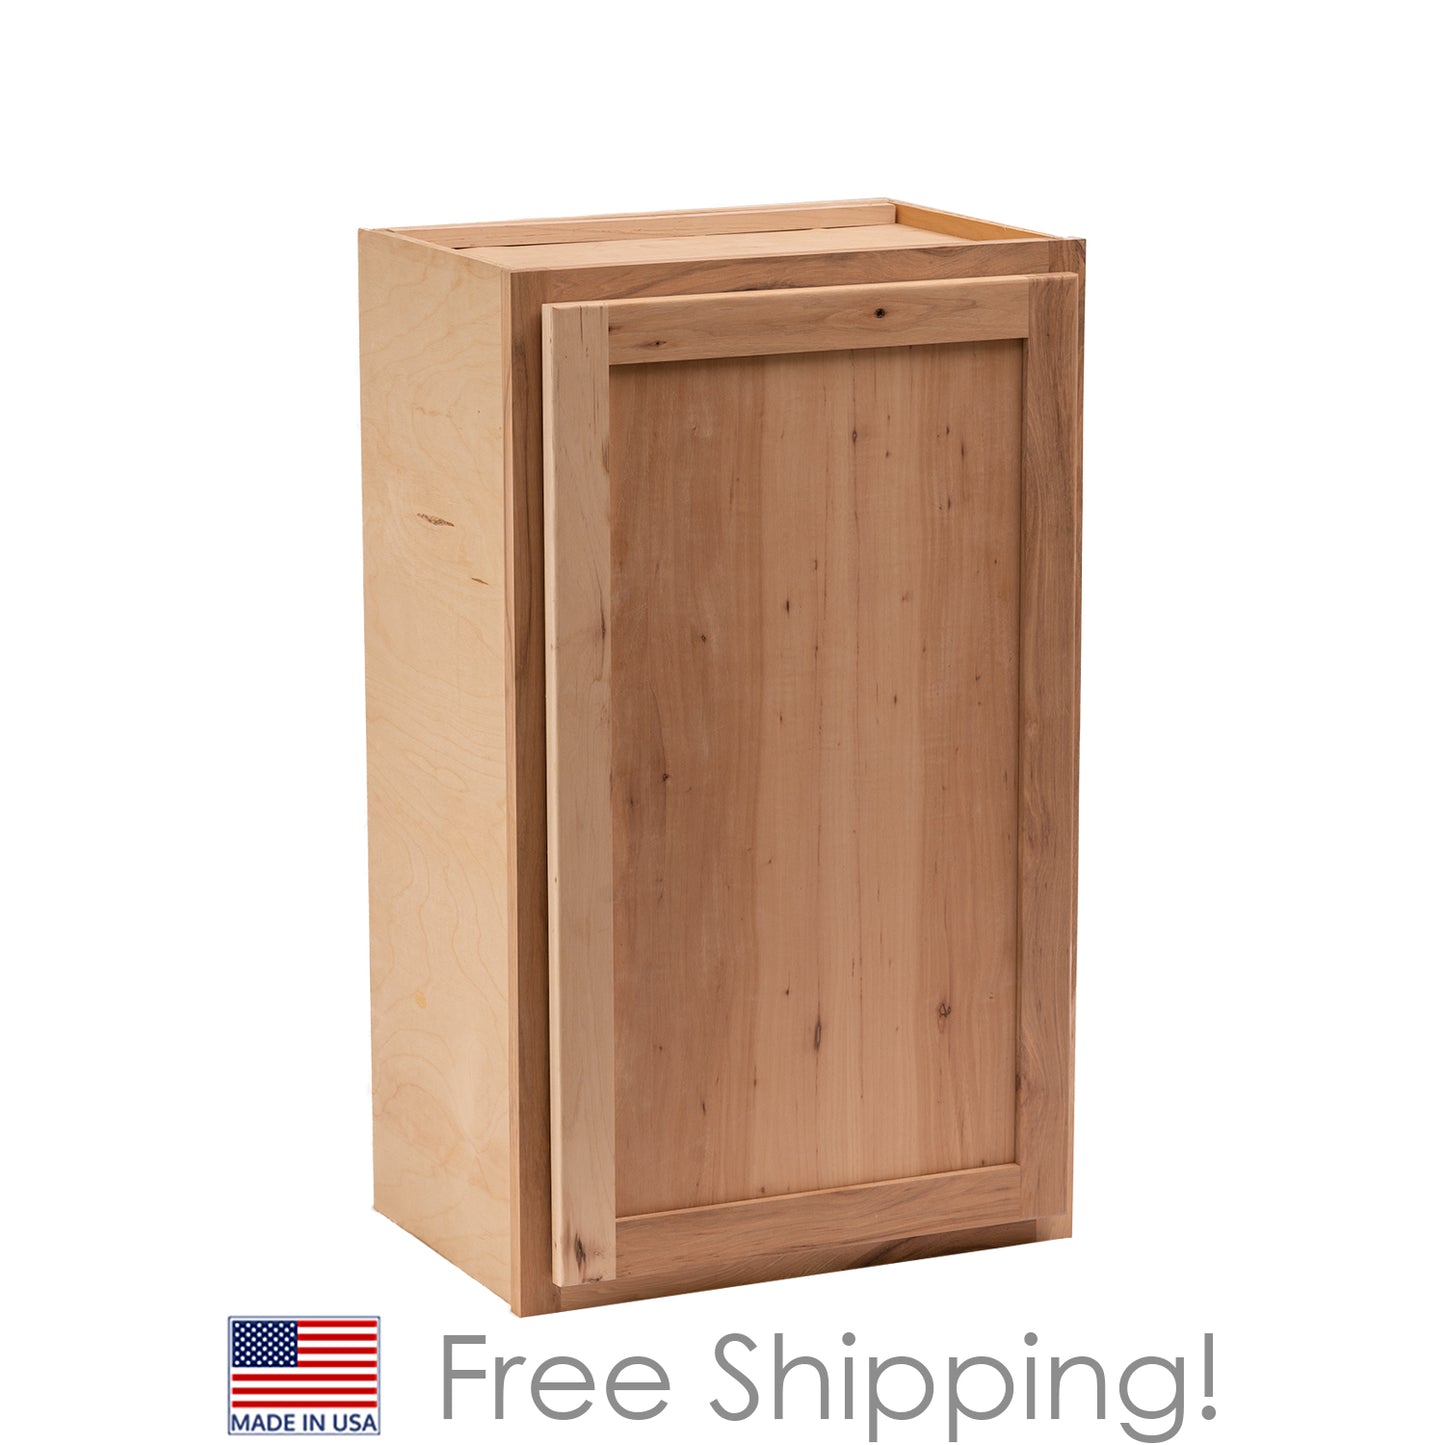 Quicklock RTA - Winding River Collection - Raw Hickory 18"Wx30"Hx12"D Wall Cabinet